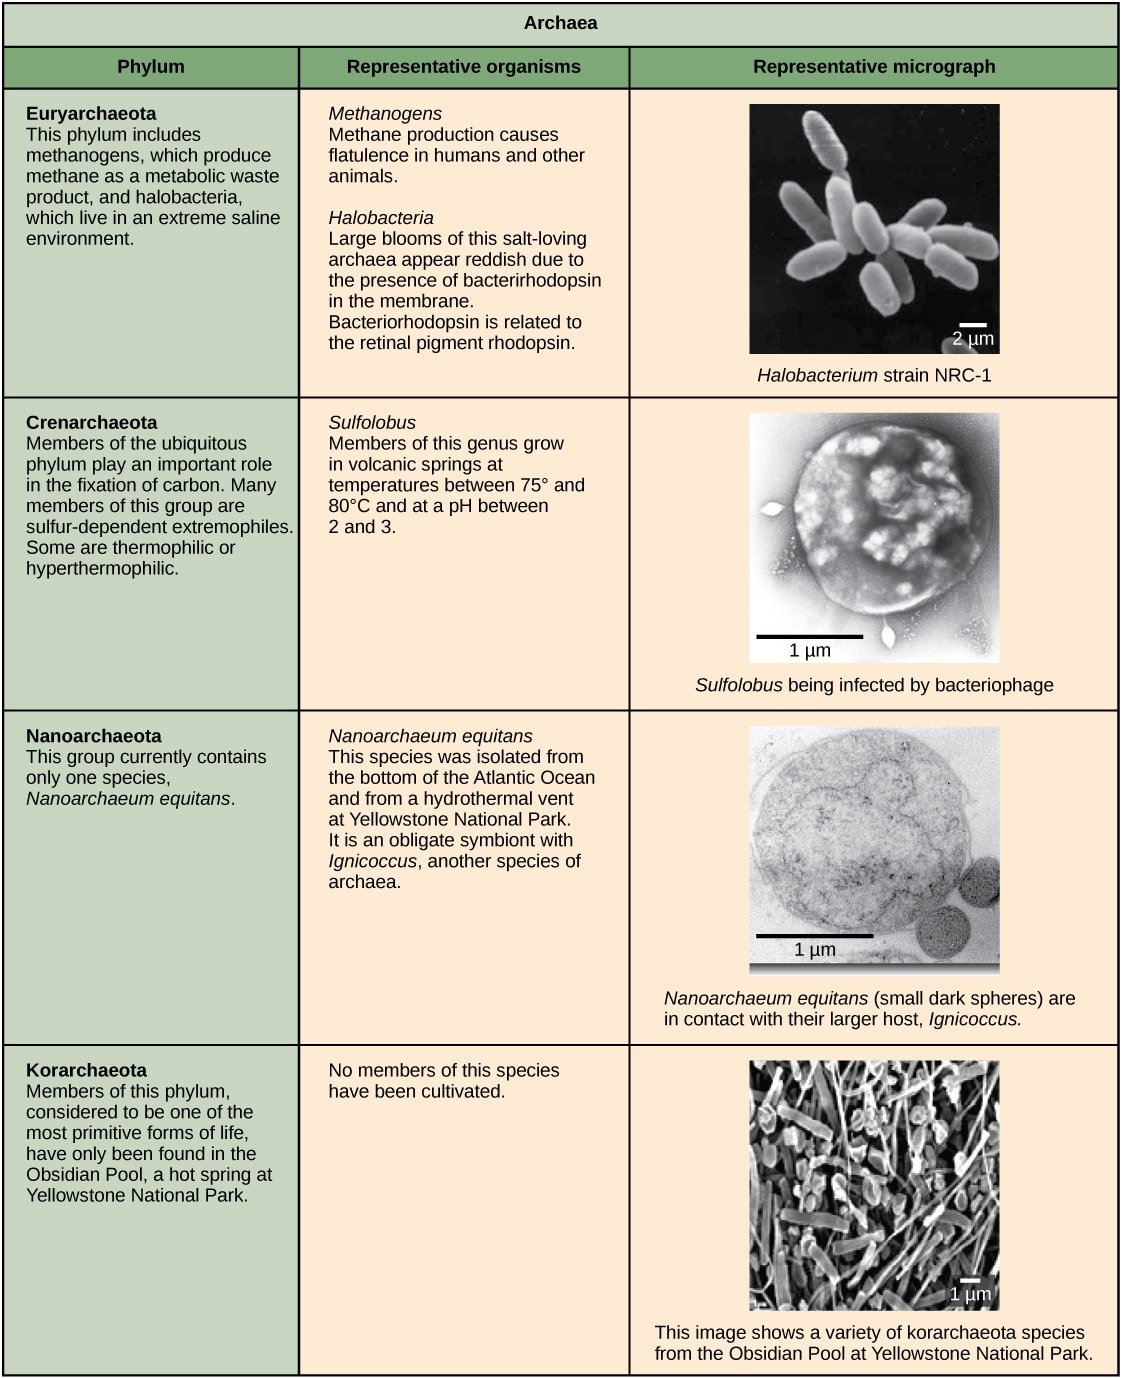 Structure of Prokaryotes: Bacteria and Archaea